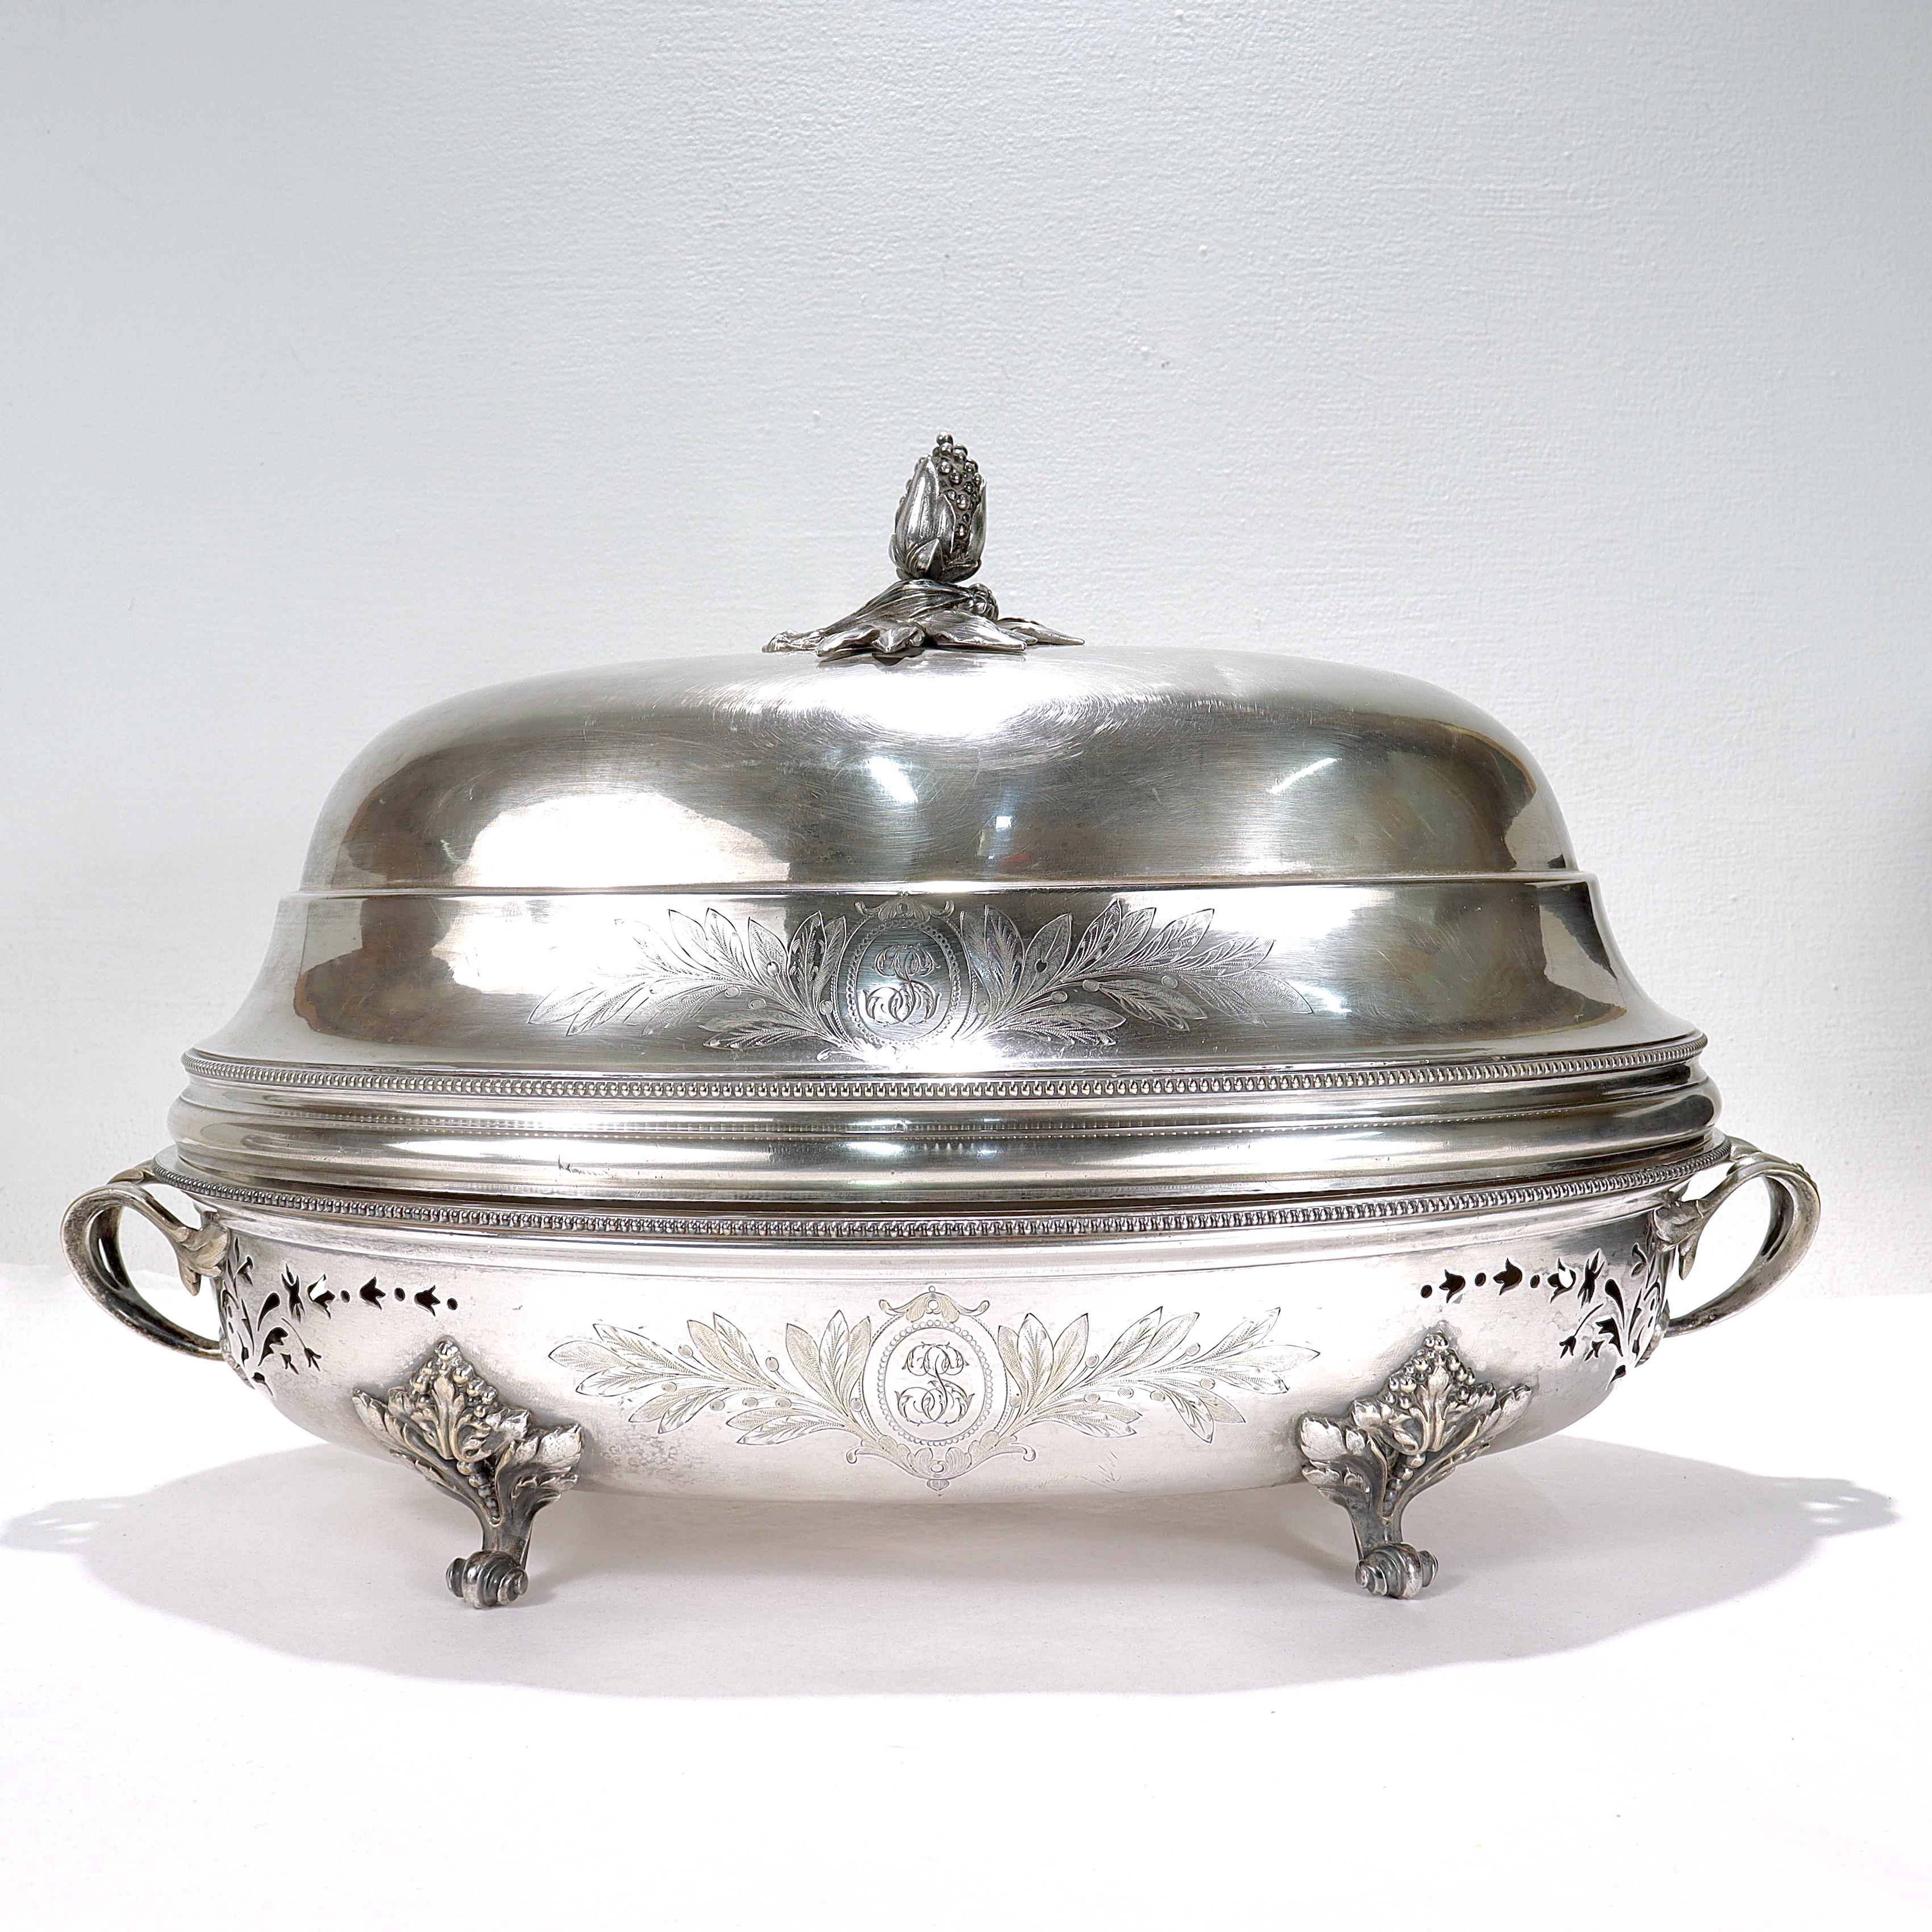 A fine antique silver plated food warmer or tureen.

By Christofle et Cie.

Consisting of a two-part oval meat or fish warmer with scroll feet and acanthus leaf handles with a conforming dome or cover.

The cover has a flower or fruit finial.